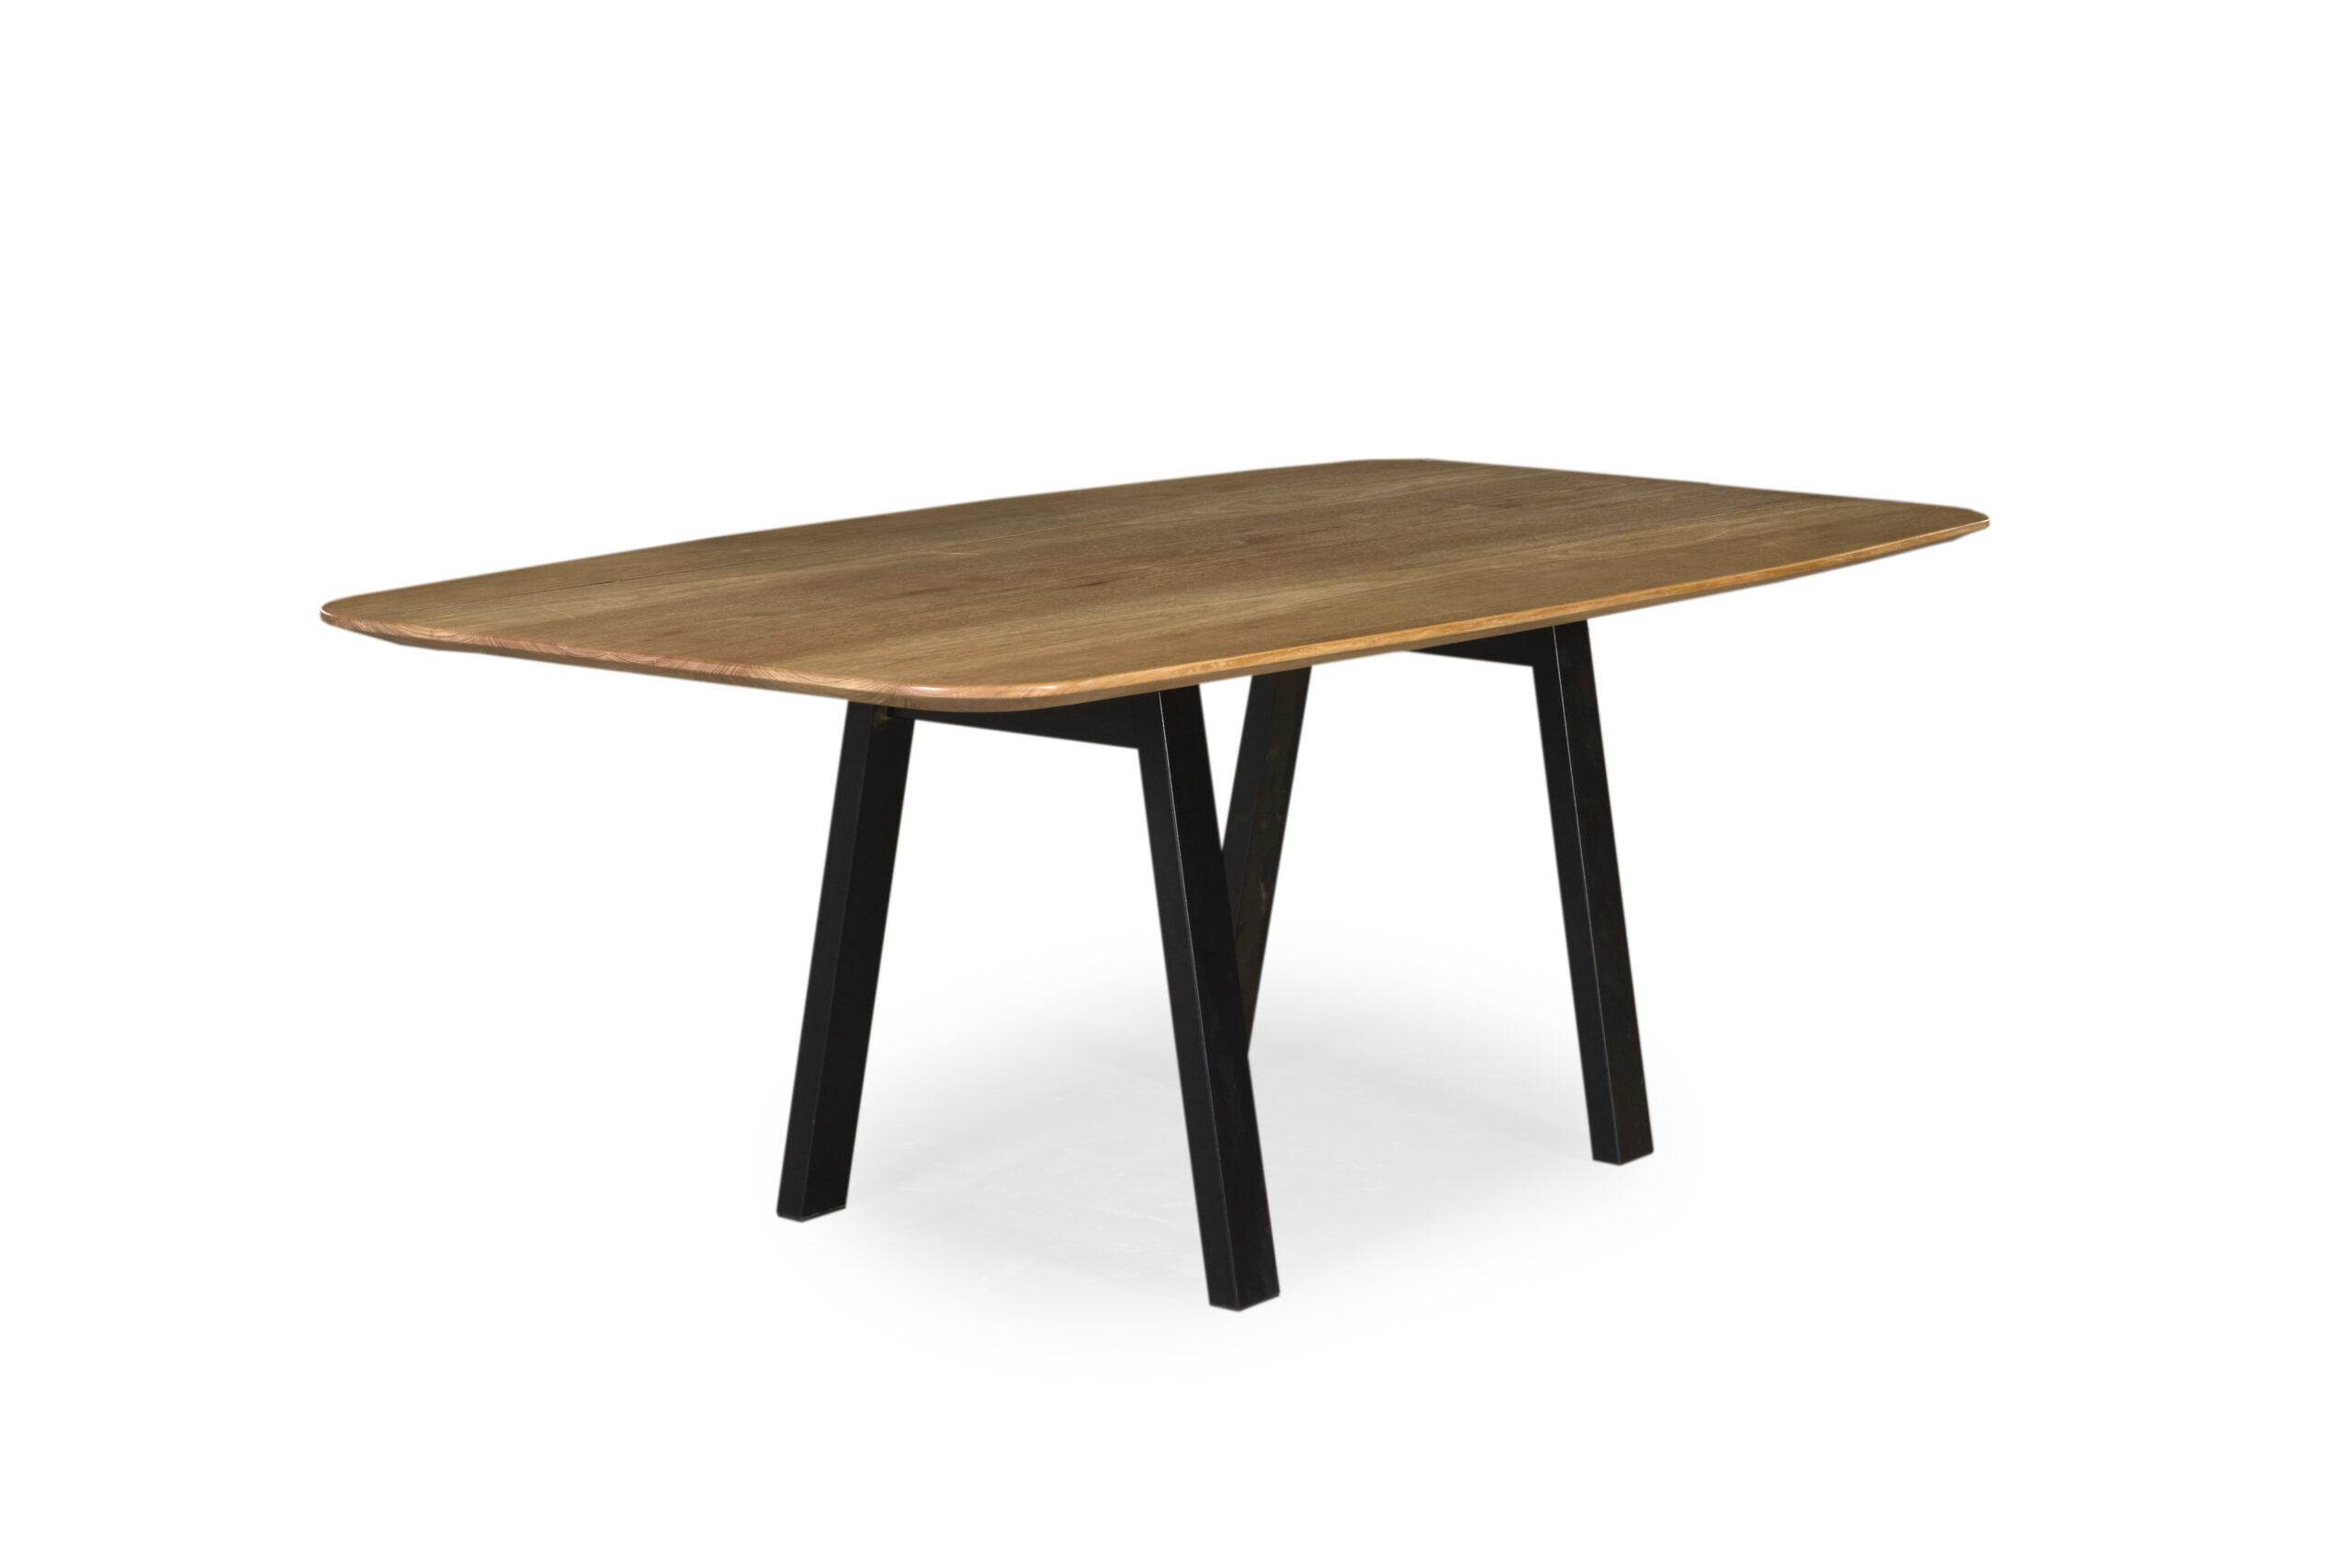 Balwyn Dining Table: Crafted from Victorian Ash timber with Kooyong Black Steel base.